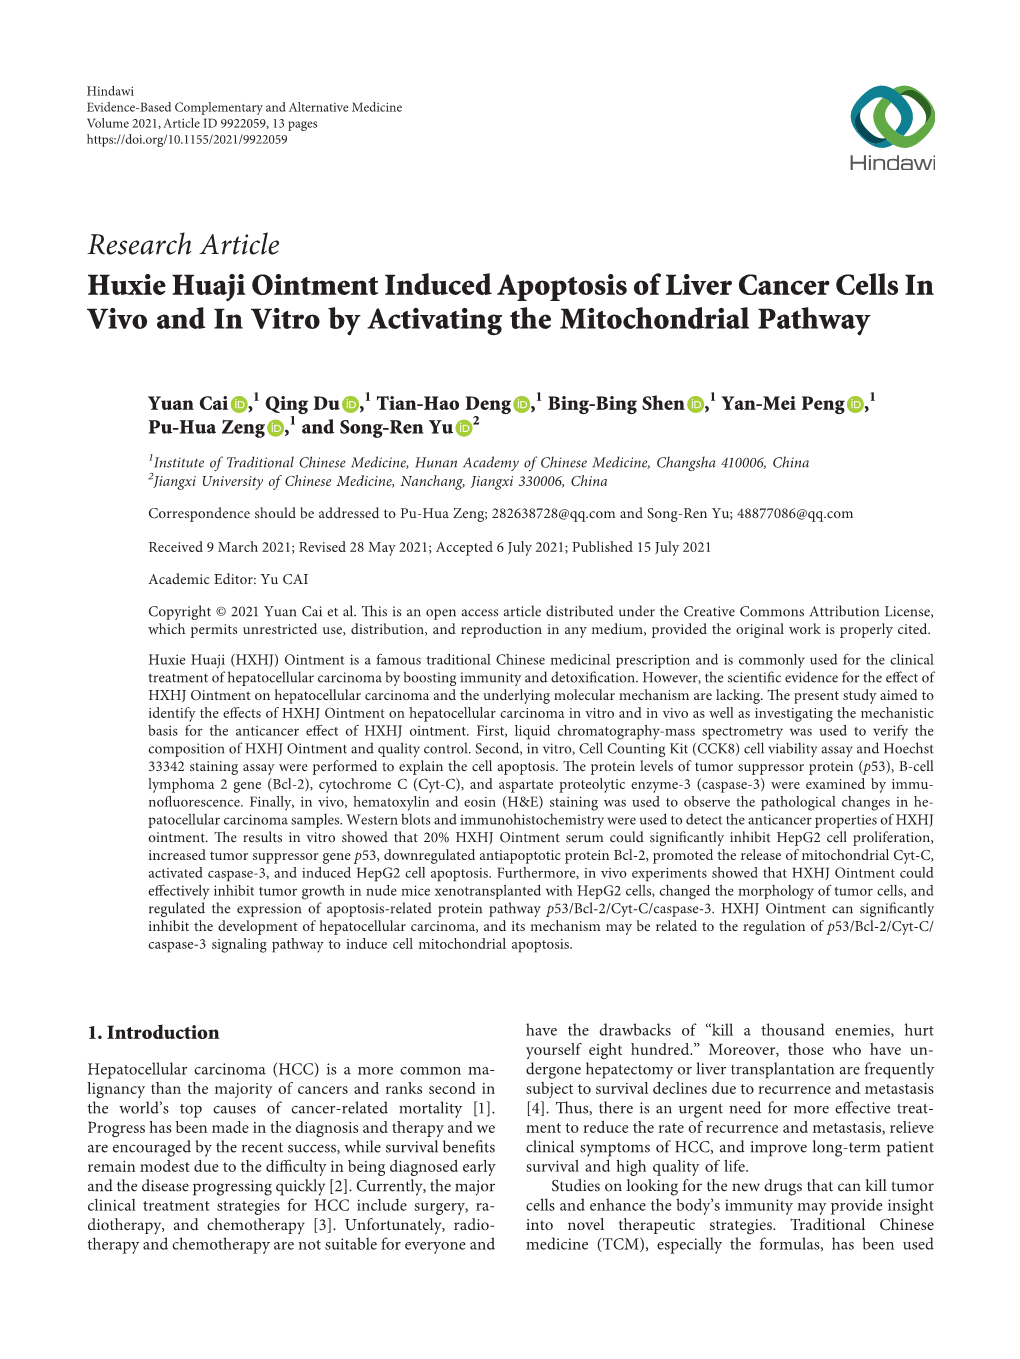 Huxie Huaji Ointment Induced Apoptosis of Liver Cancer Cells in Vivo and in Vitro by Activating the Mitochondrial Pathway